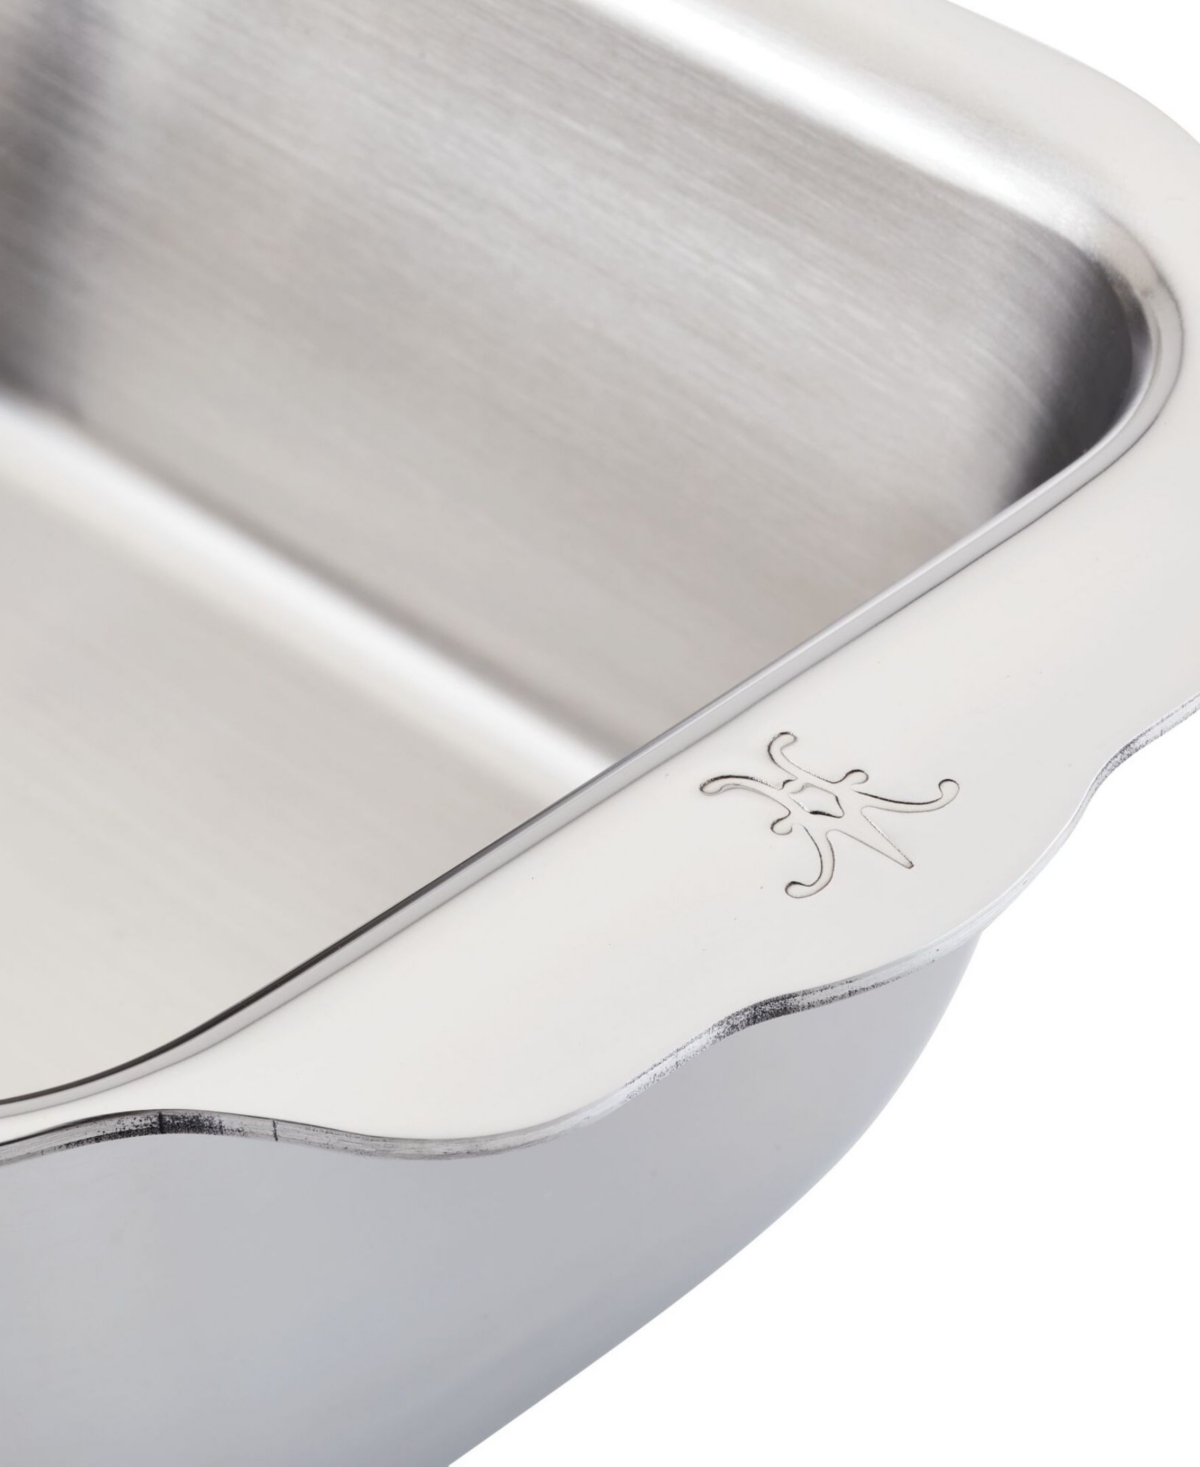 Shop Hestan Provisions Oven Bond Try-plyl 1.75-quart Loaf Pan In Stainless Steel